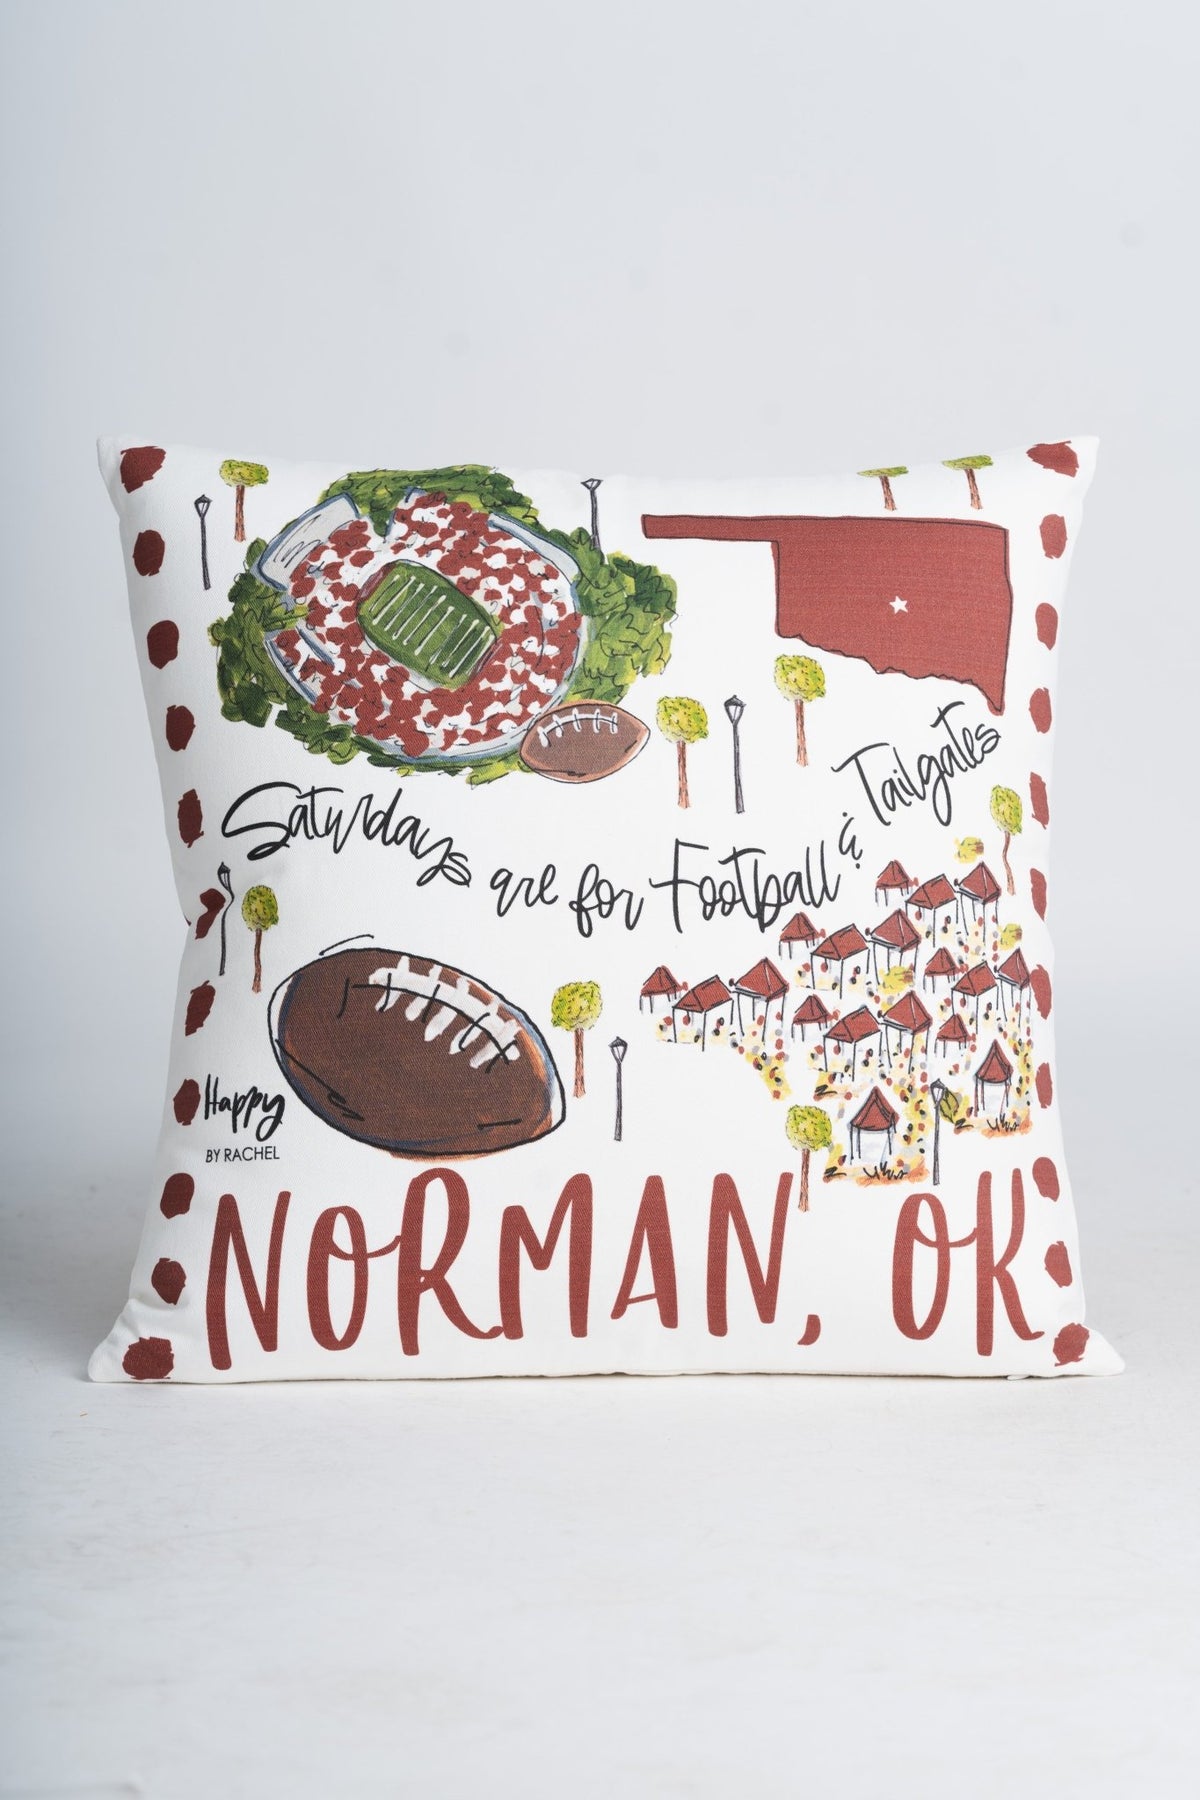 Norman, OK gameday pillow natural - Trendy Gifts at Lush Fashion Lounge Boutique in Oklahoma City